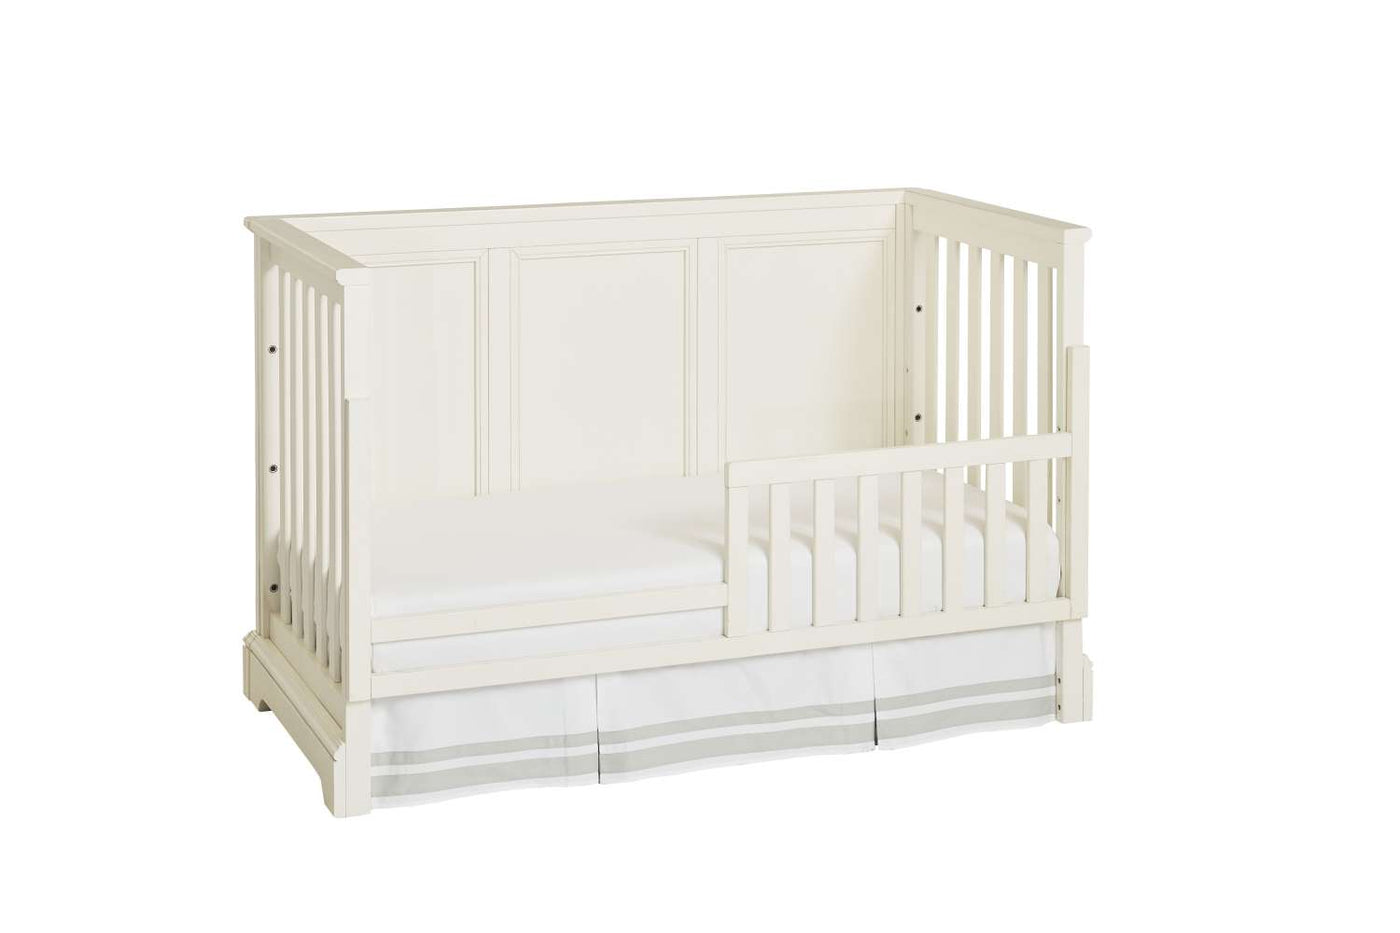 Hanley Cottage Crib with Toddler Guard Rail Package - Chalk